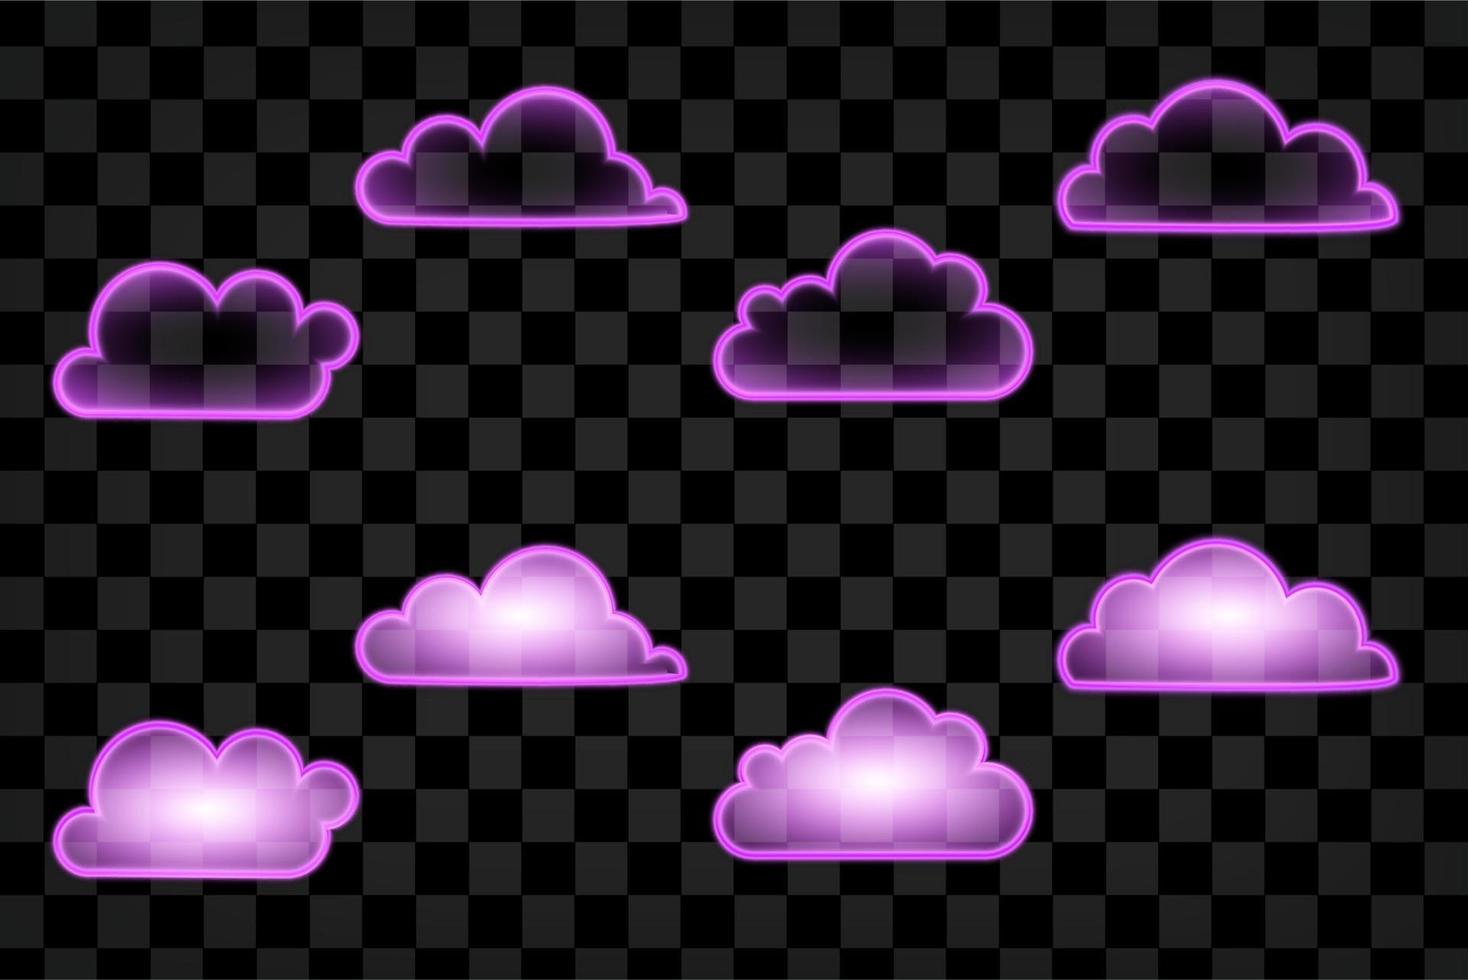 Vector Neon Clouds Set, Bright Purple Light, Icons Colelction Shining on Dark Background, Isolated Symbols.